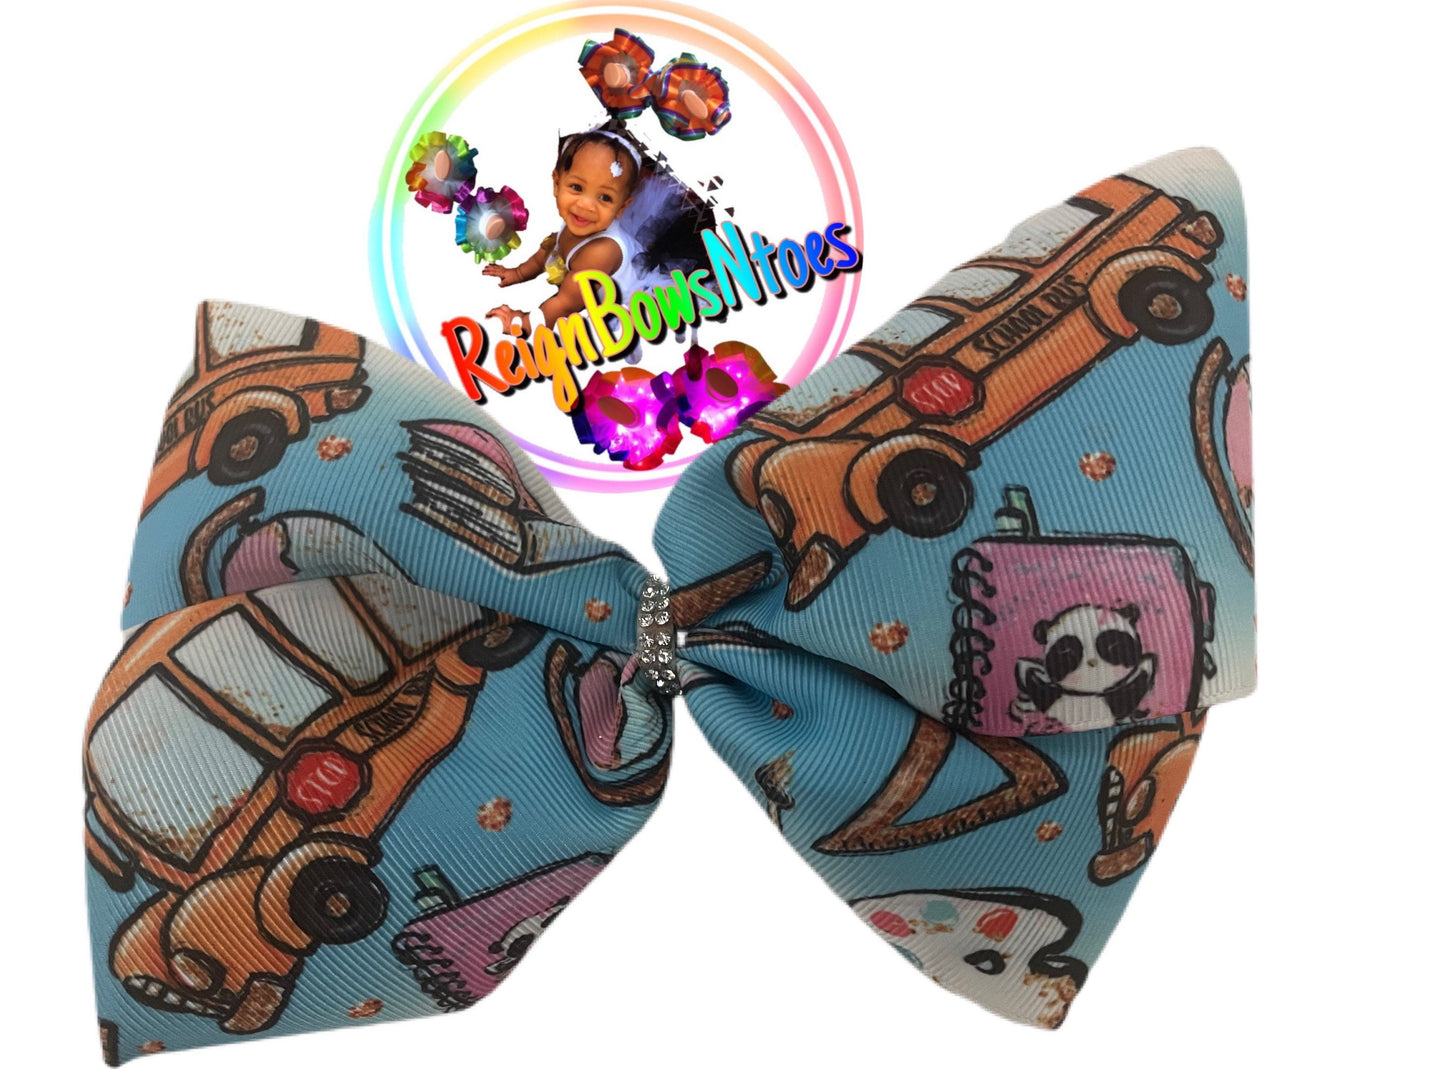 Do you need a bow(s) to match your socks? - ReignBowsNtoes